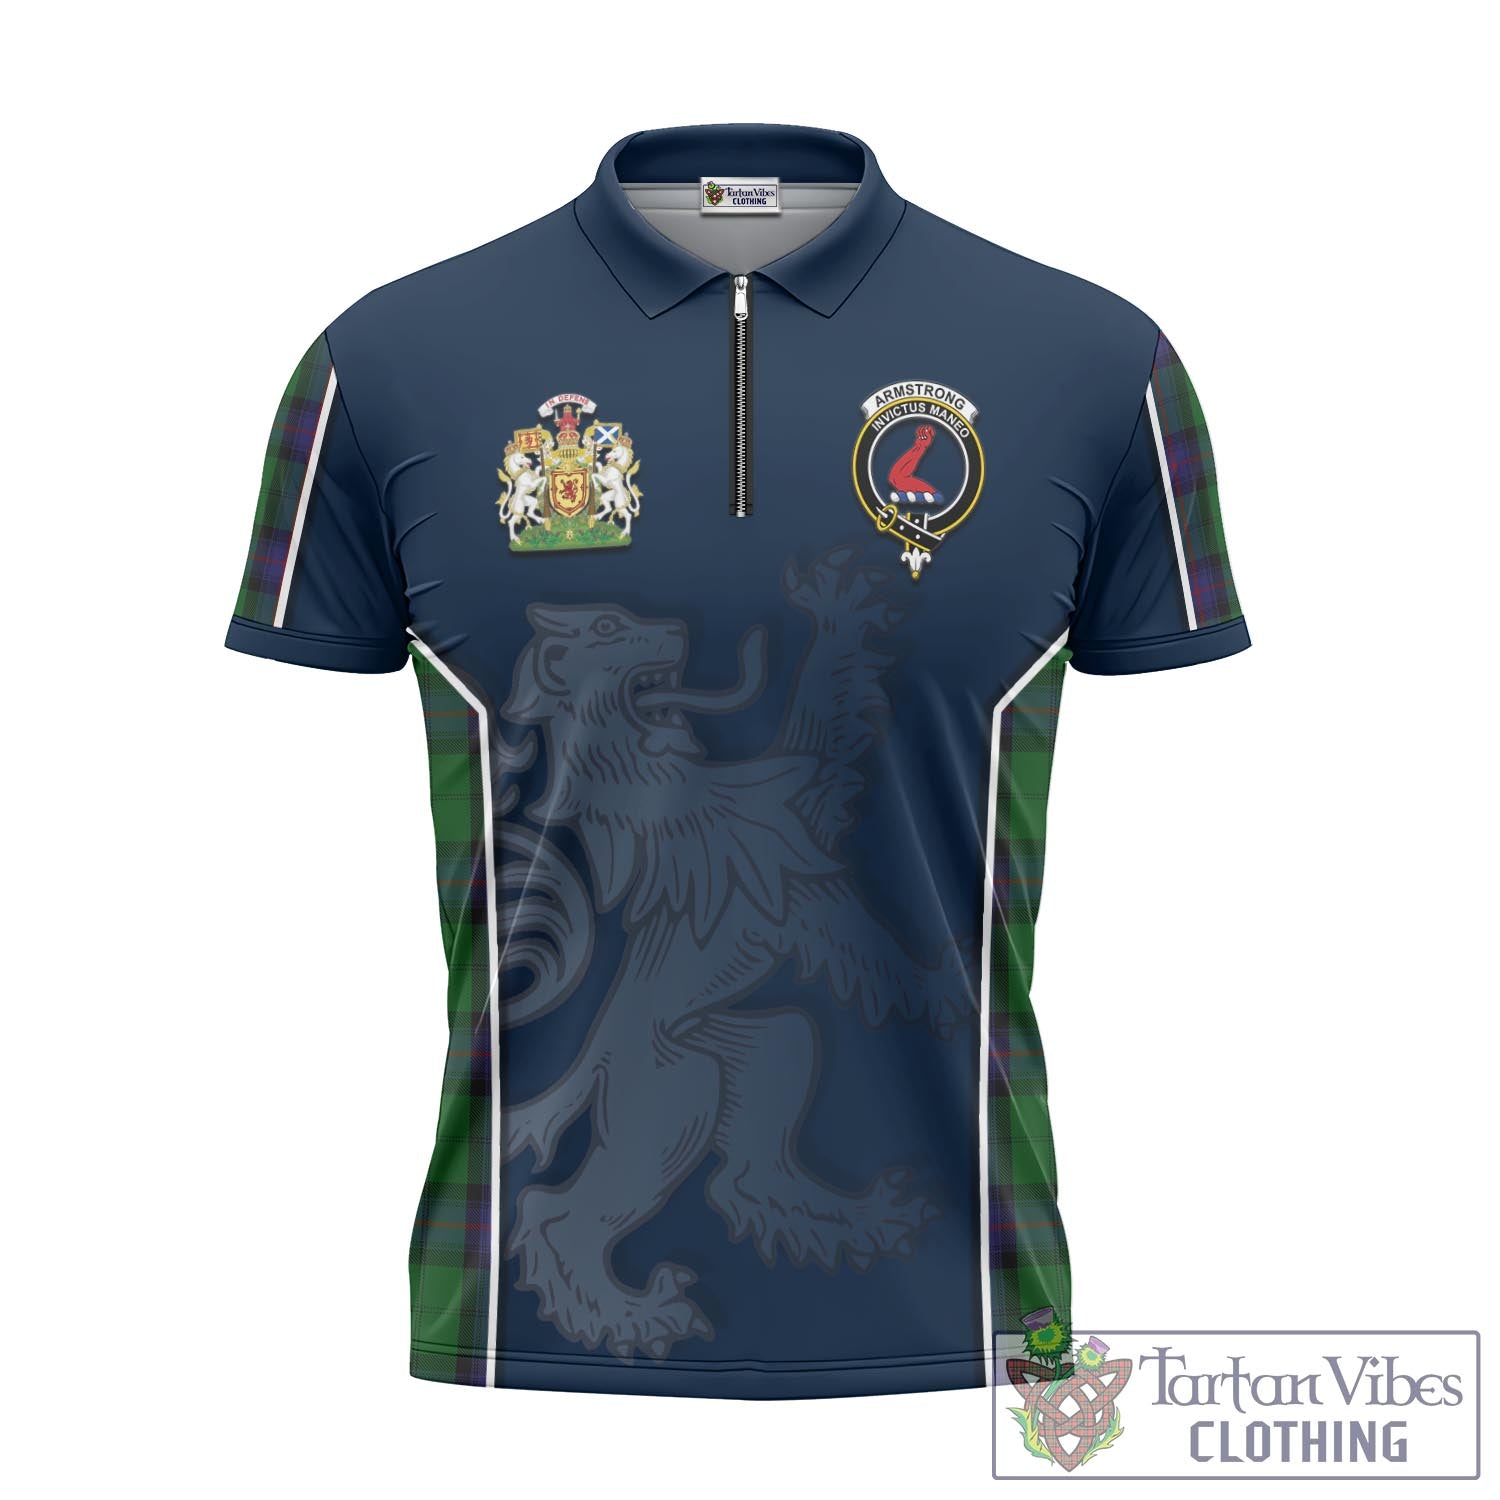 Tartan Vibes Clothing Armstrong Tartan Zipper Polo Shirt with Family Crest and Lion Rampant Vibes Sport Style